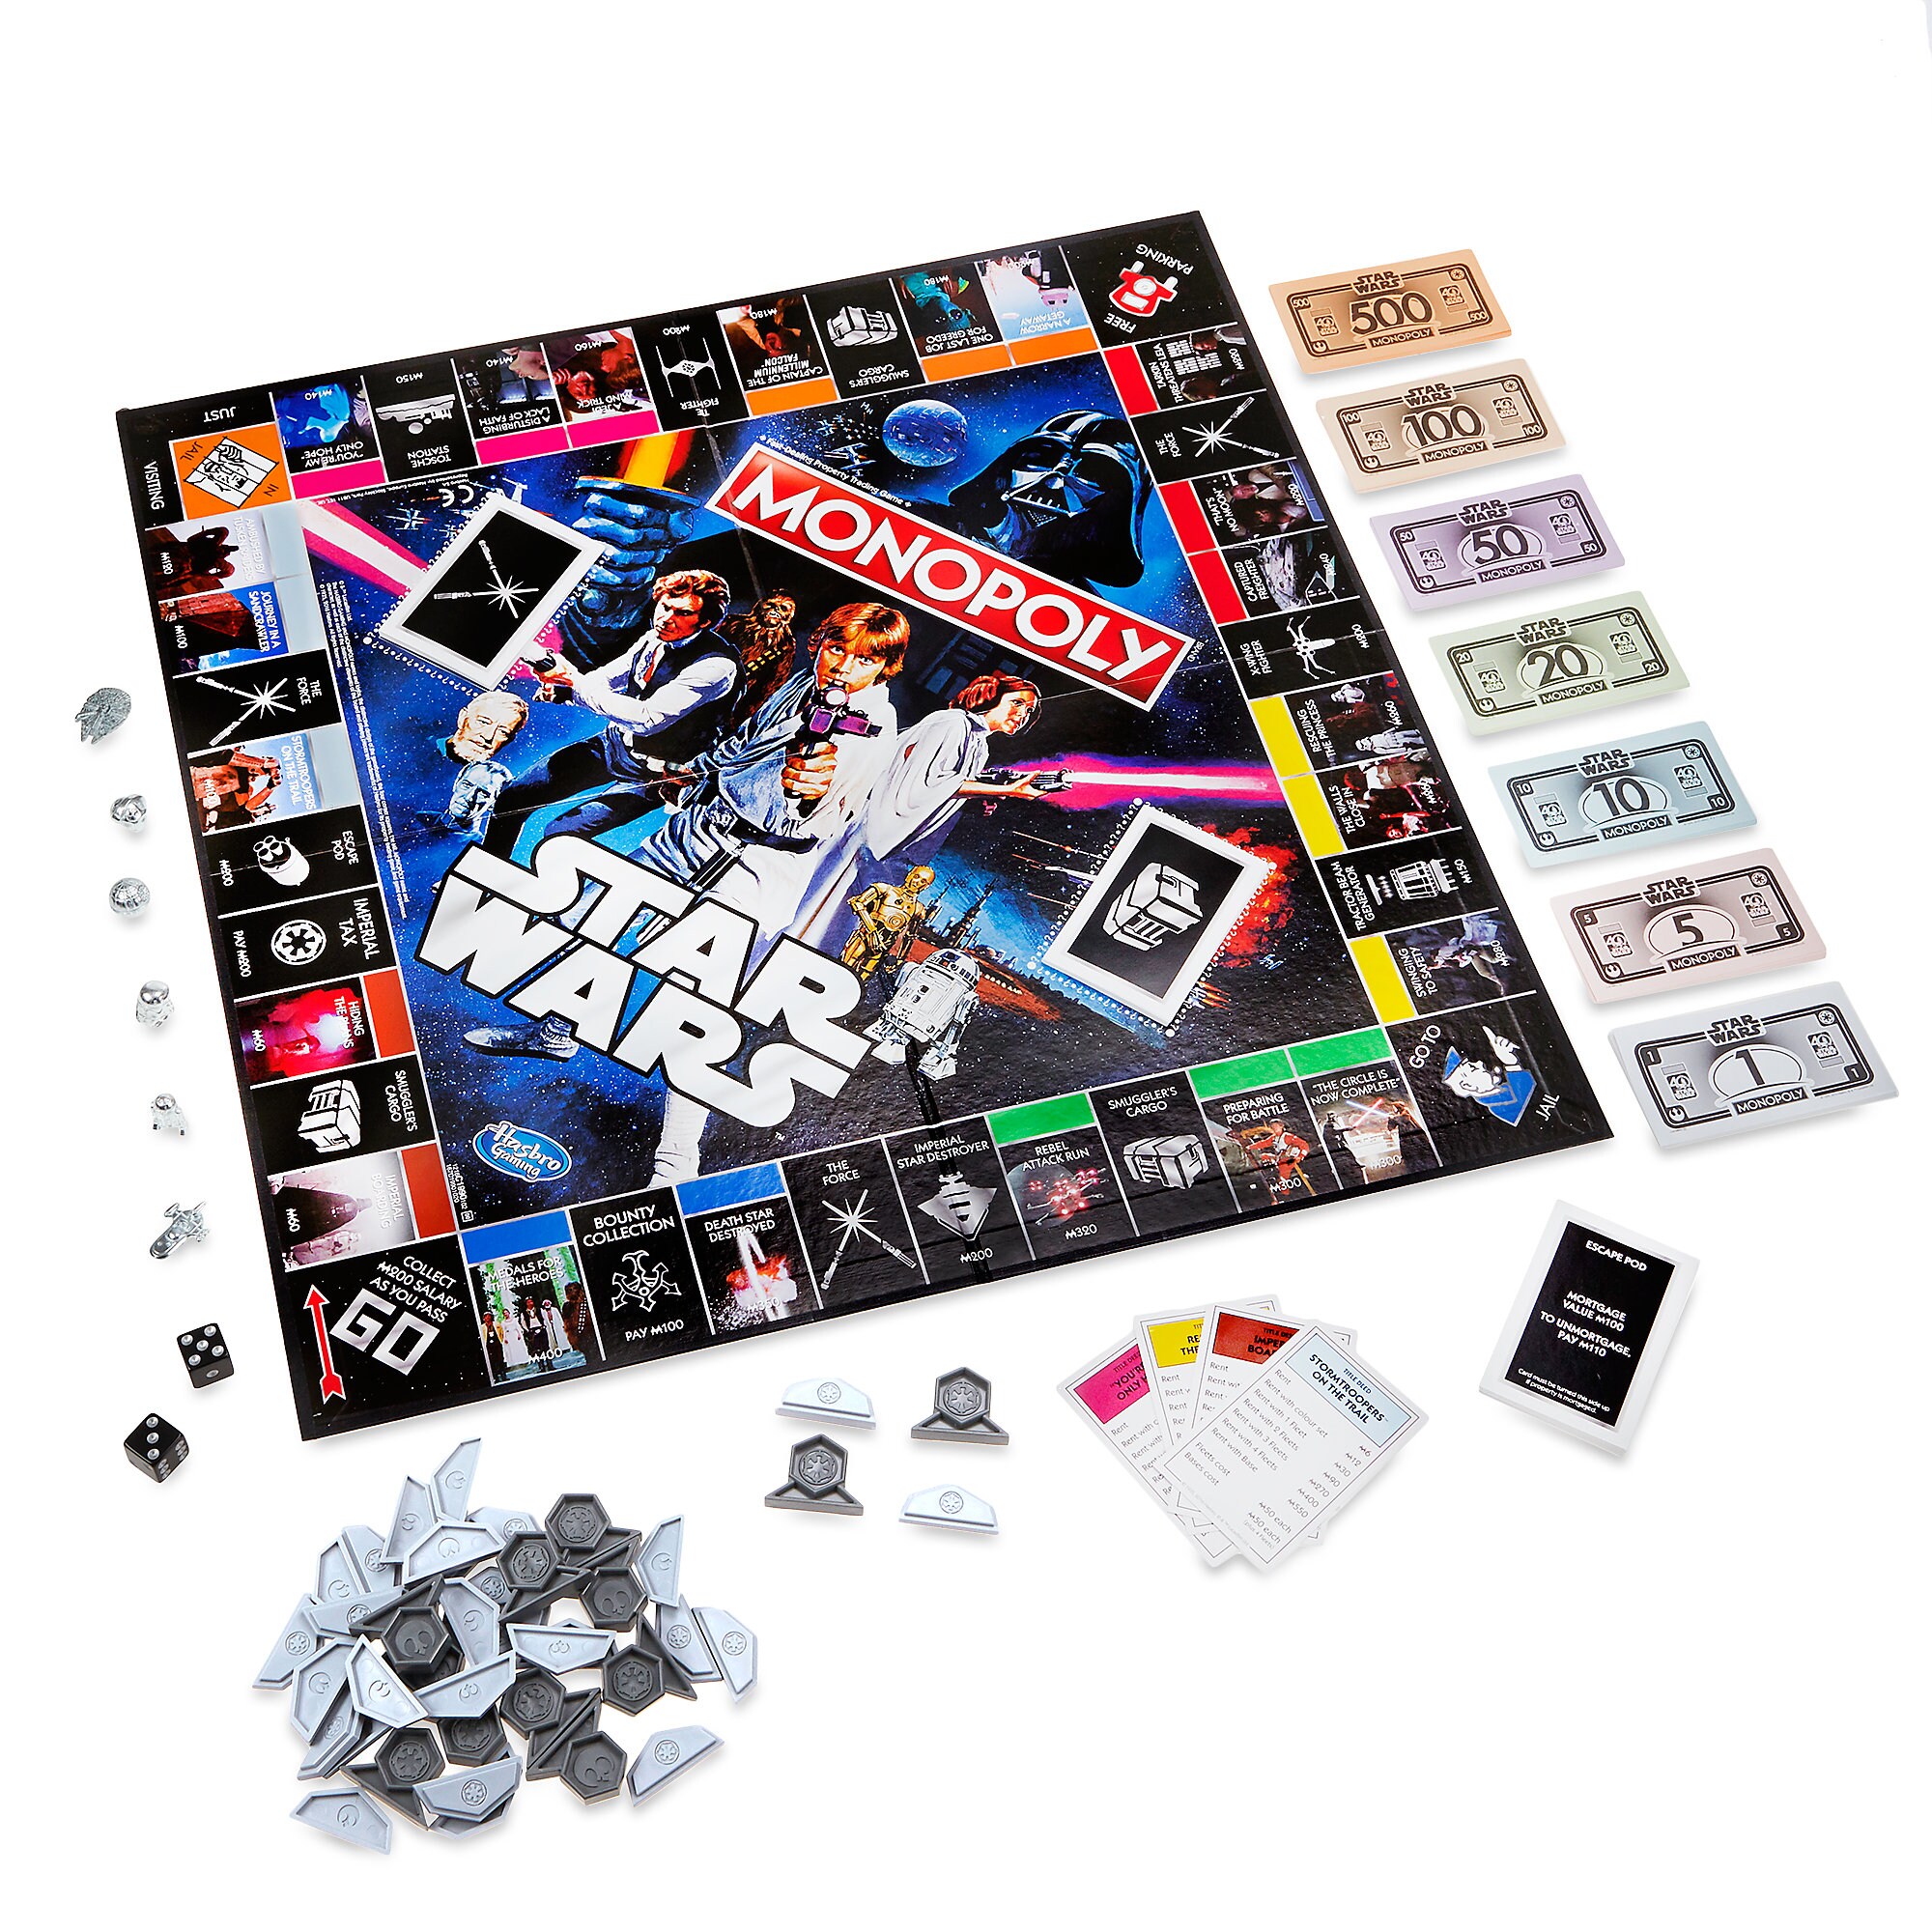 Stars Wars 40th Anniversary Special Edition Monopoly Game